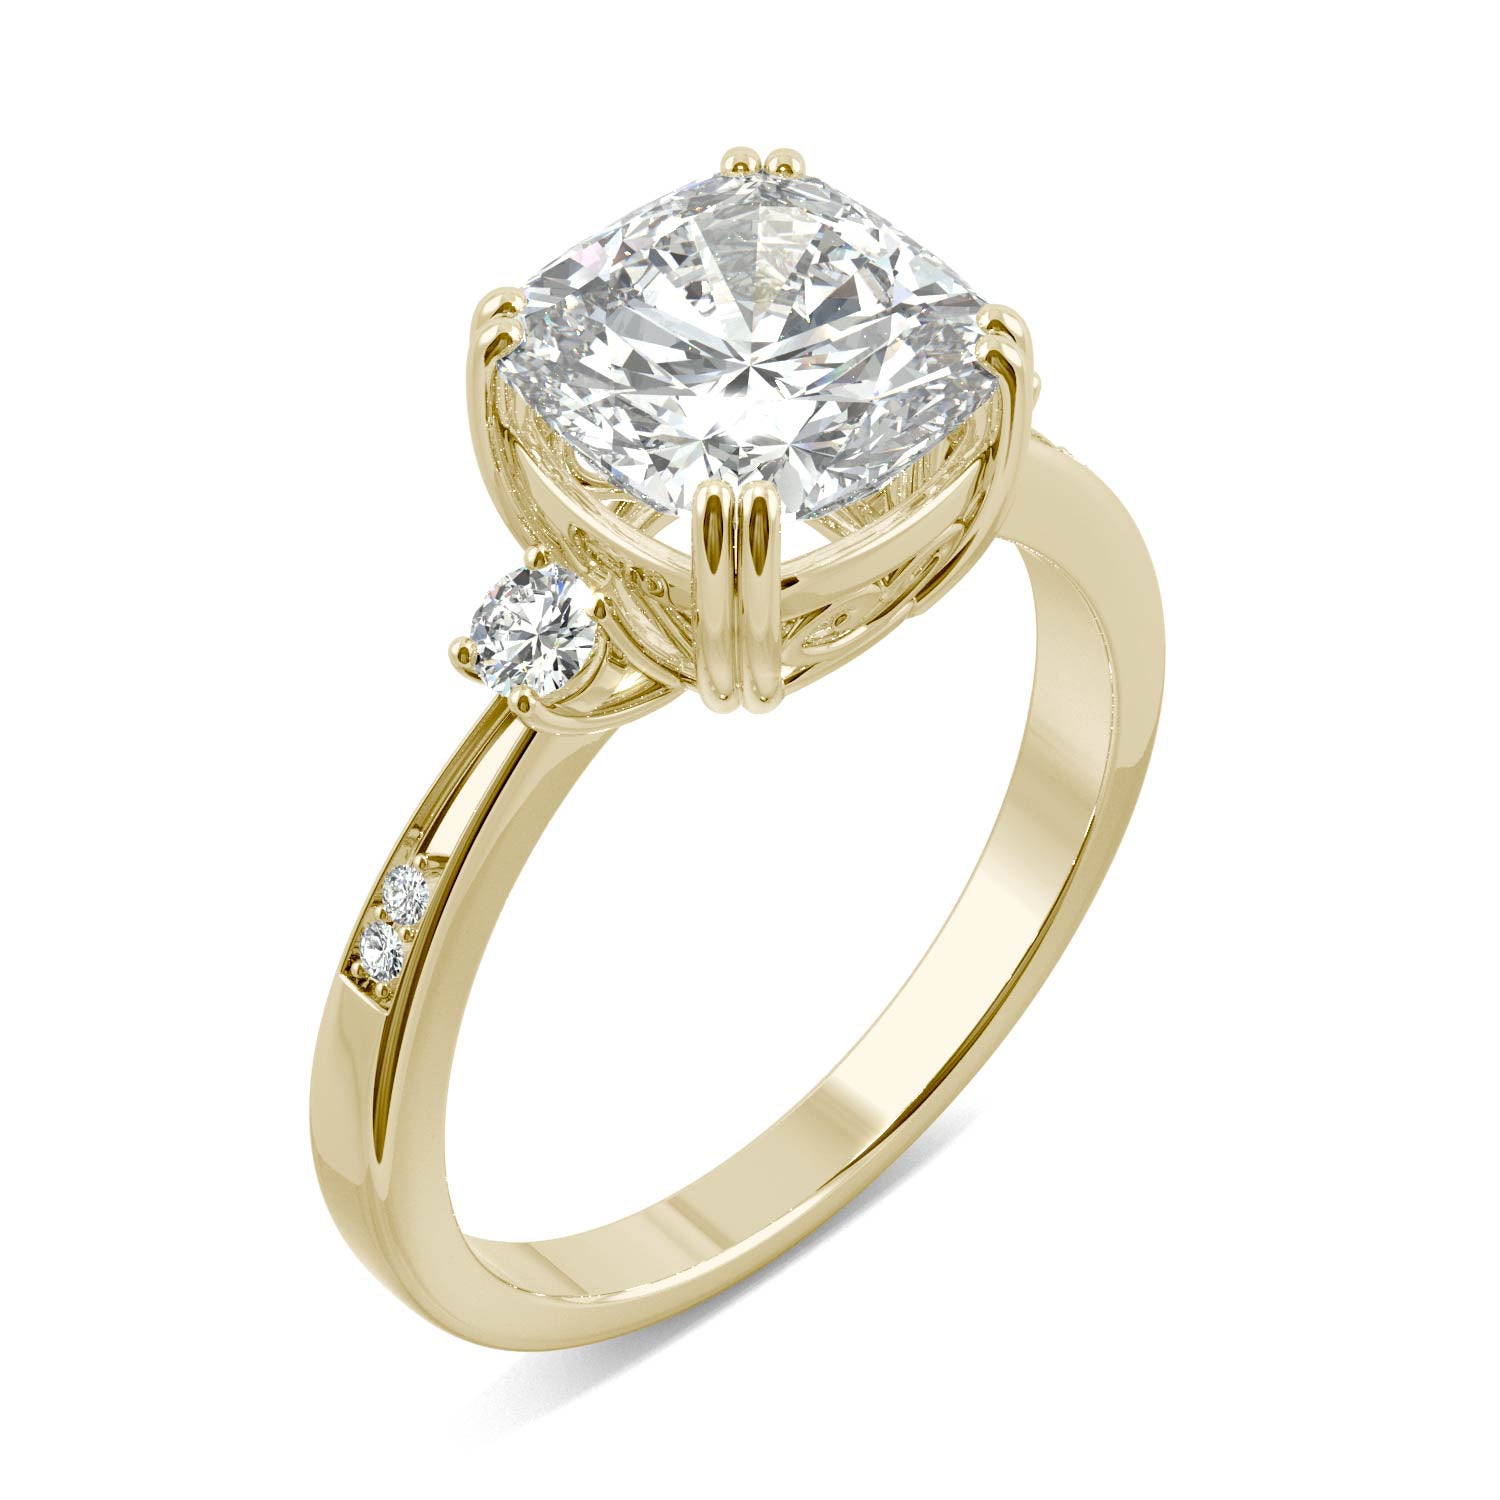 2.54 CTW DEW Cushion Moissanite Seven Stone Ring in 14K Yellow Gold